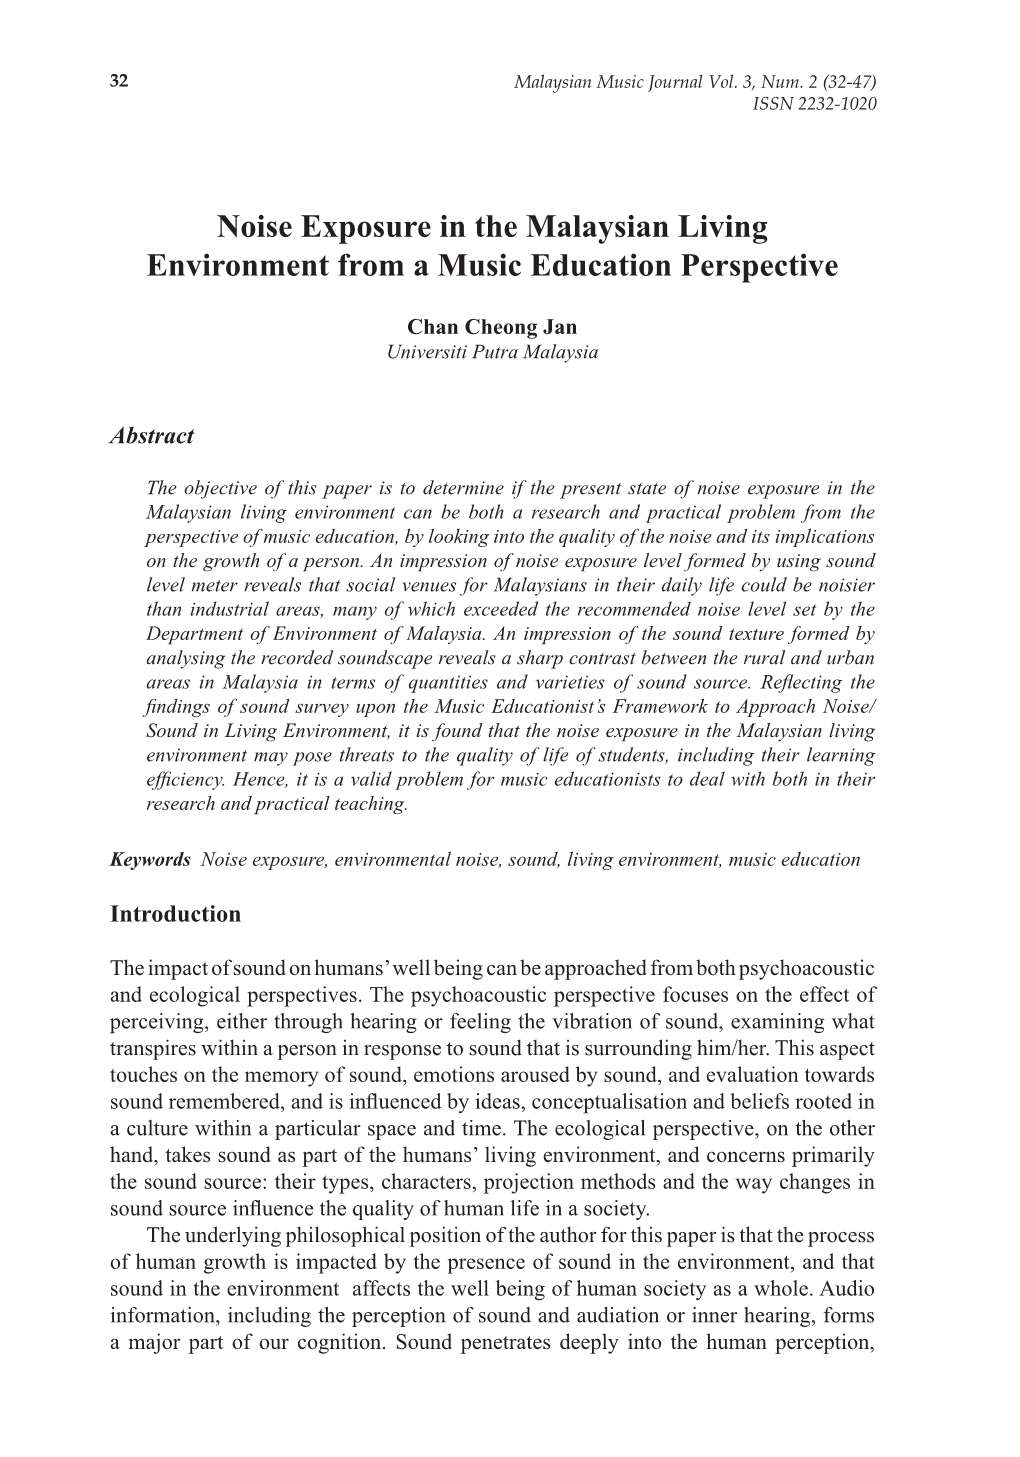 Noise Exposure in the Malaysian Living Environment from a Music Education Perspective